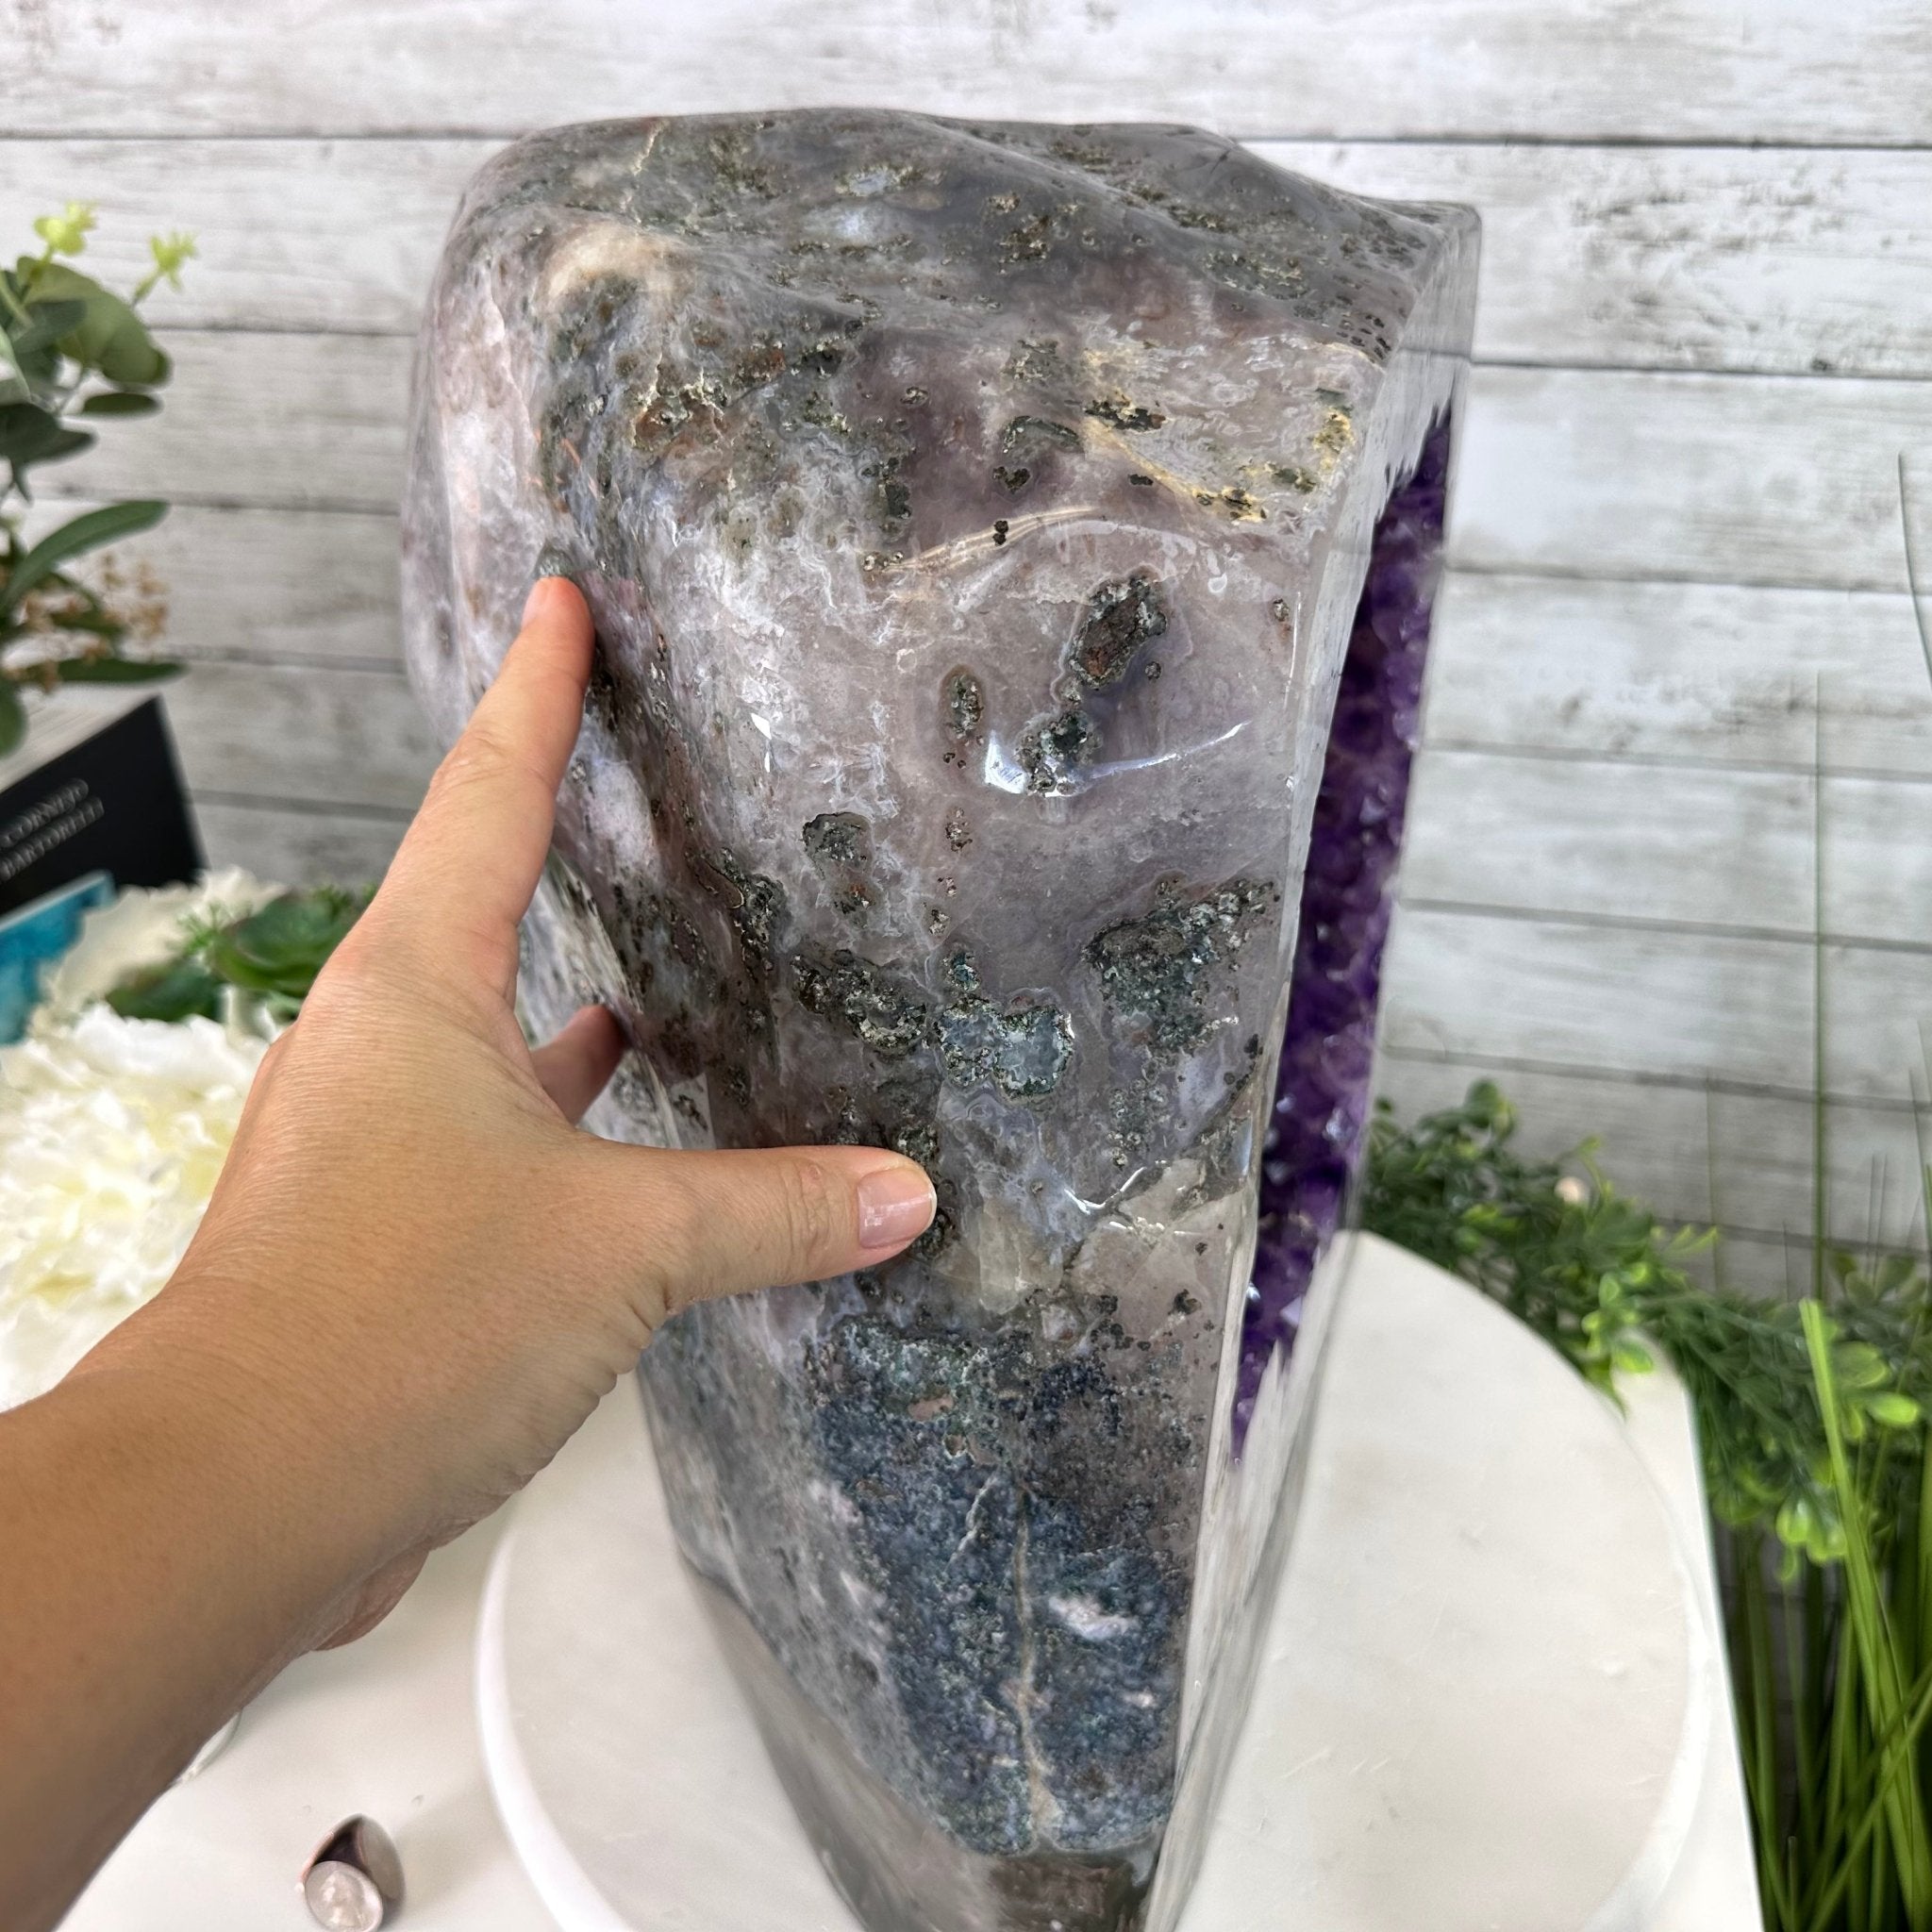 Extra Plus Quality Polished Brazilian Amethyst Cathedral, 81.9 lbs & 16.5" tall Model #5602-0180 by Brazil Gems - Brazil GemsBrazil GemsExtra Plus Quality Polished Brazilian Amethyst Cathedral, 81.9 lbs & 16.5" tall Model #5602-0180 by Brazil GemsPolished Cathedrals5602-0180